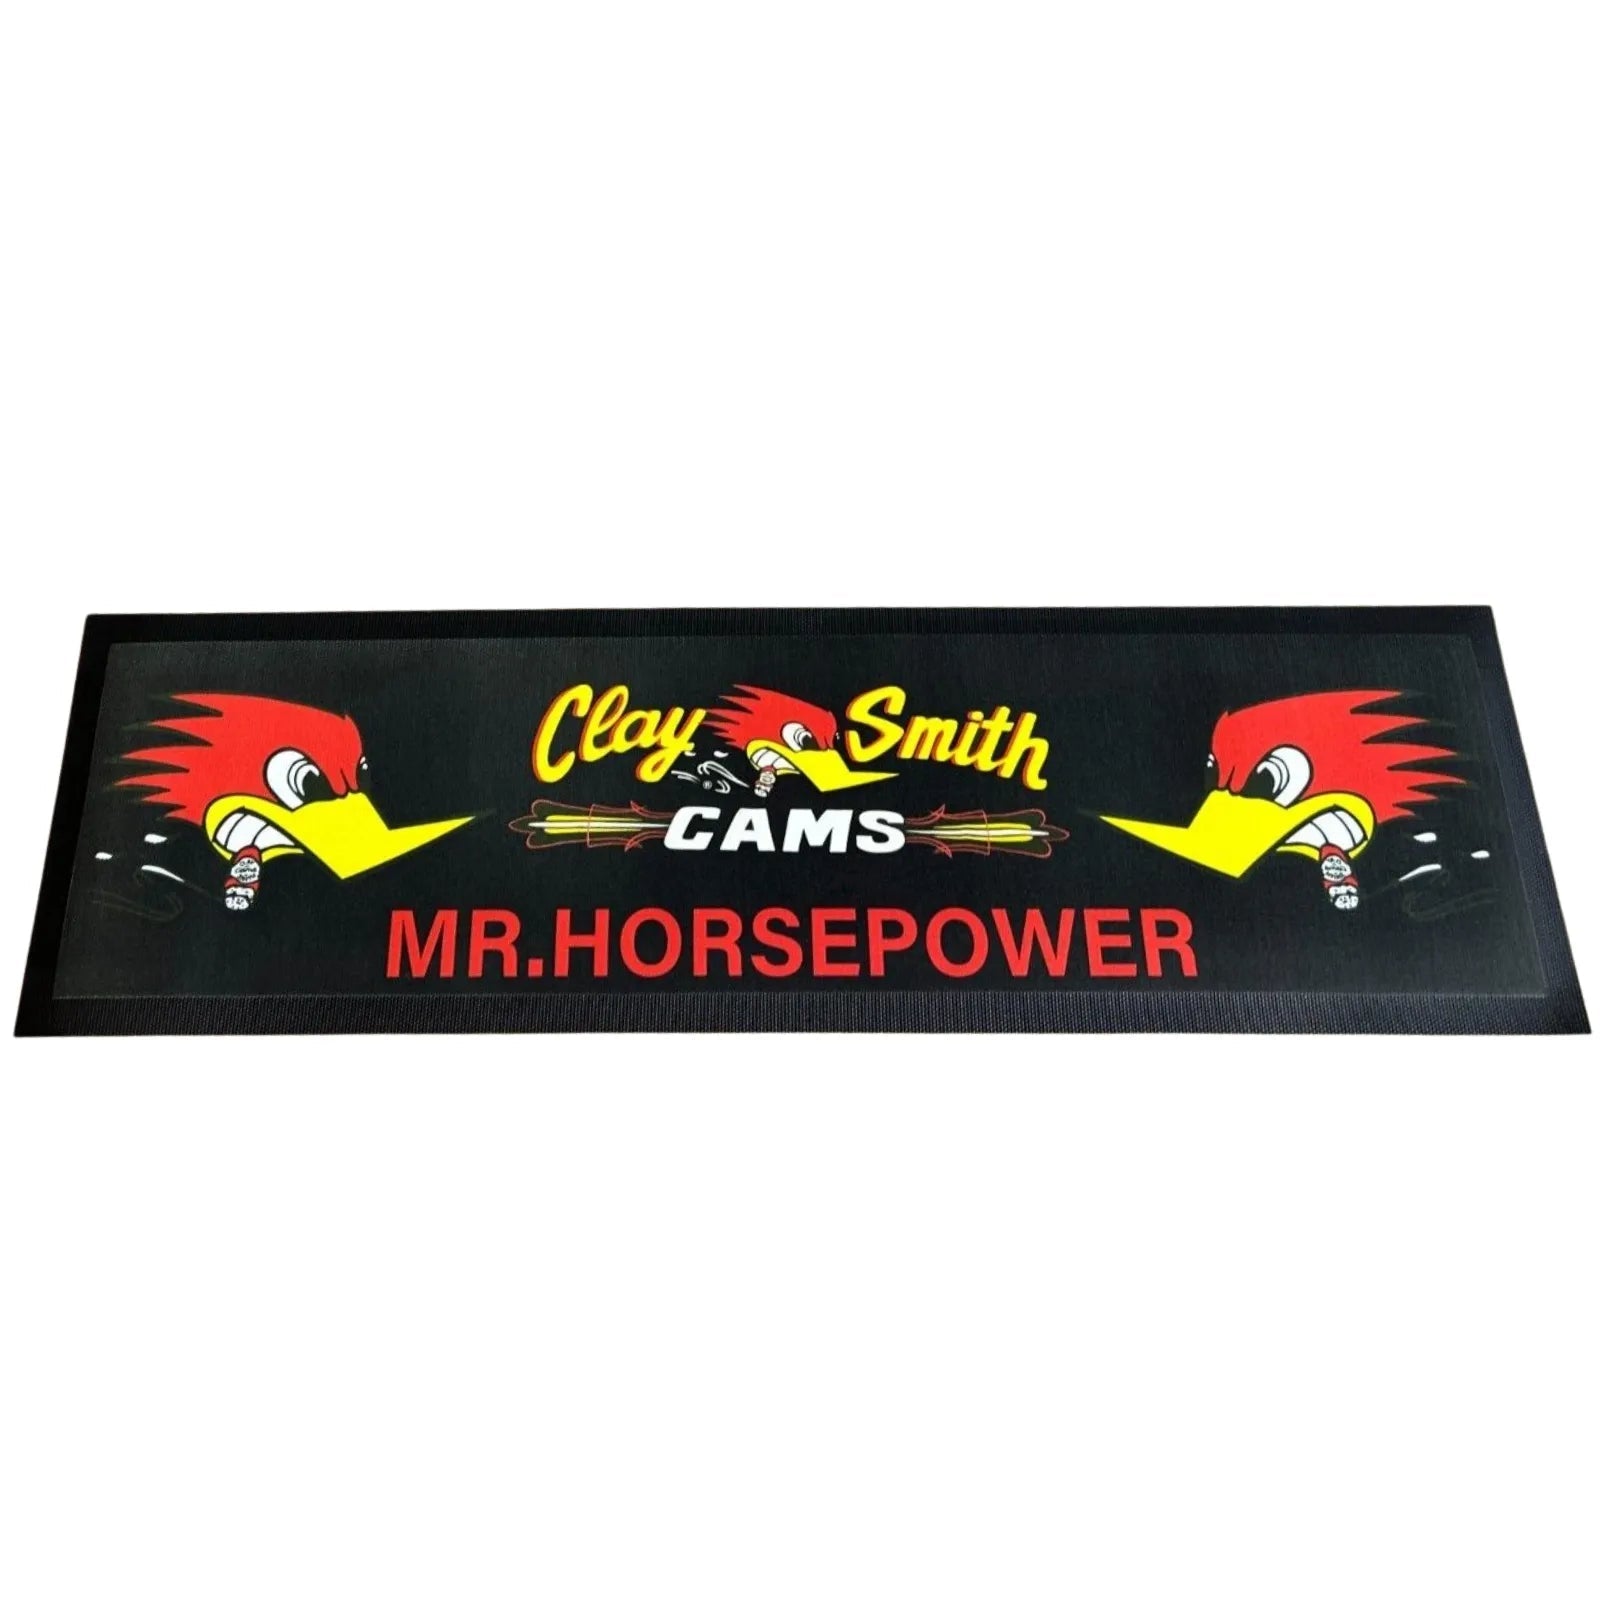 Clay Smith Premium Rubber-Backed Bar Mat Runner - KING CAVE